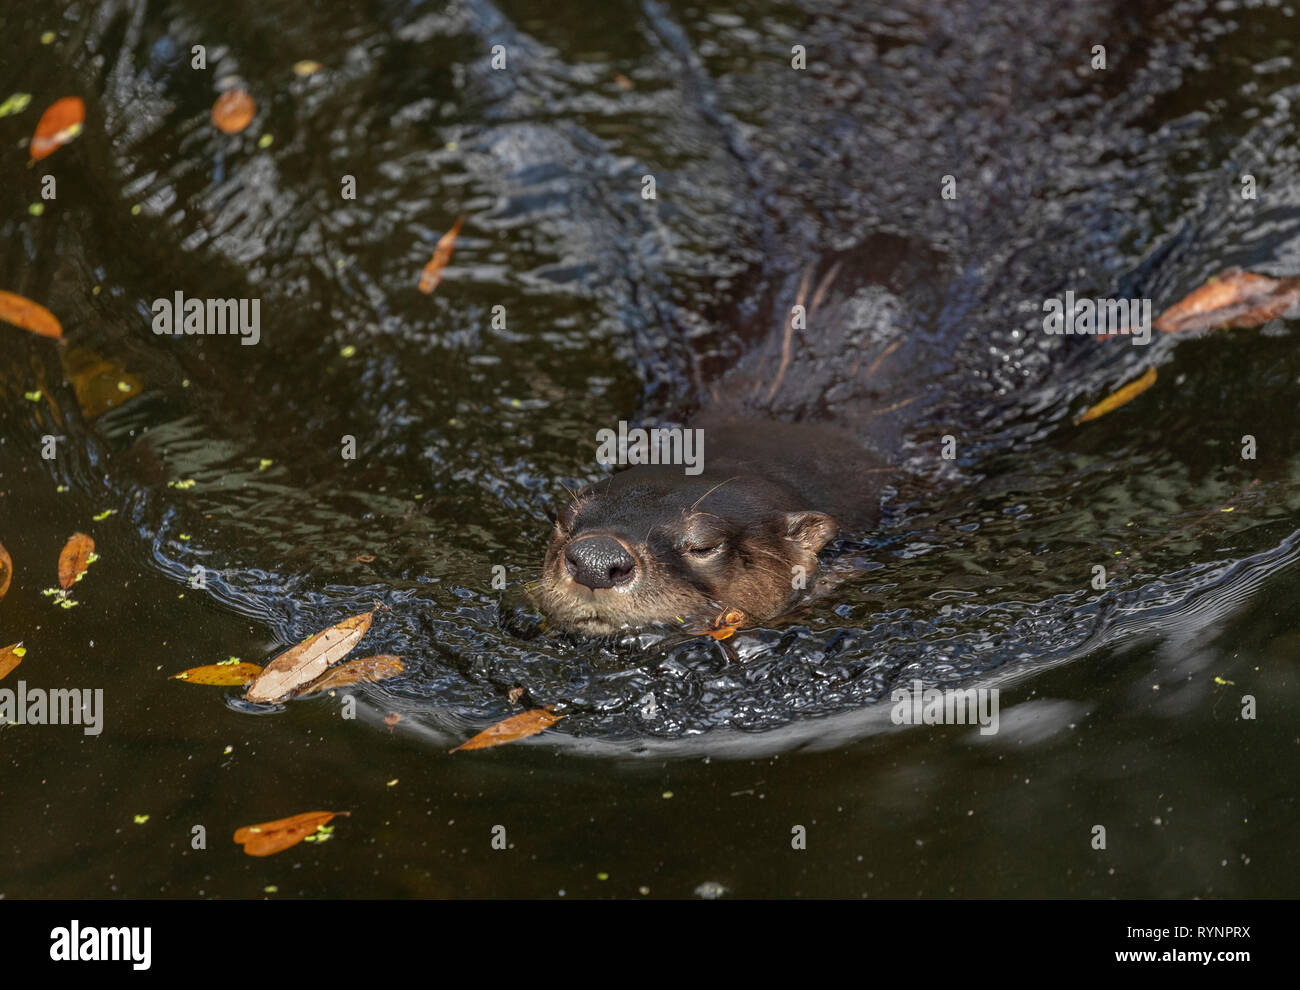 North American river otter, Lontra canadensis, swimming in river, Florida. Stock Photo